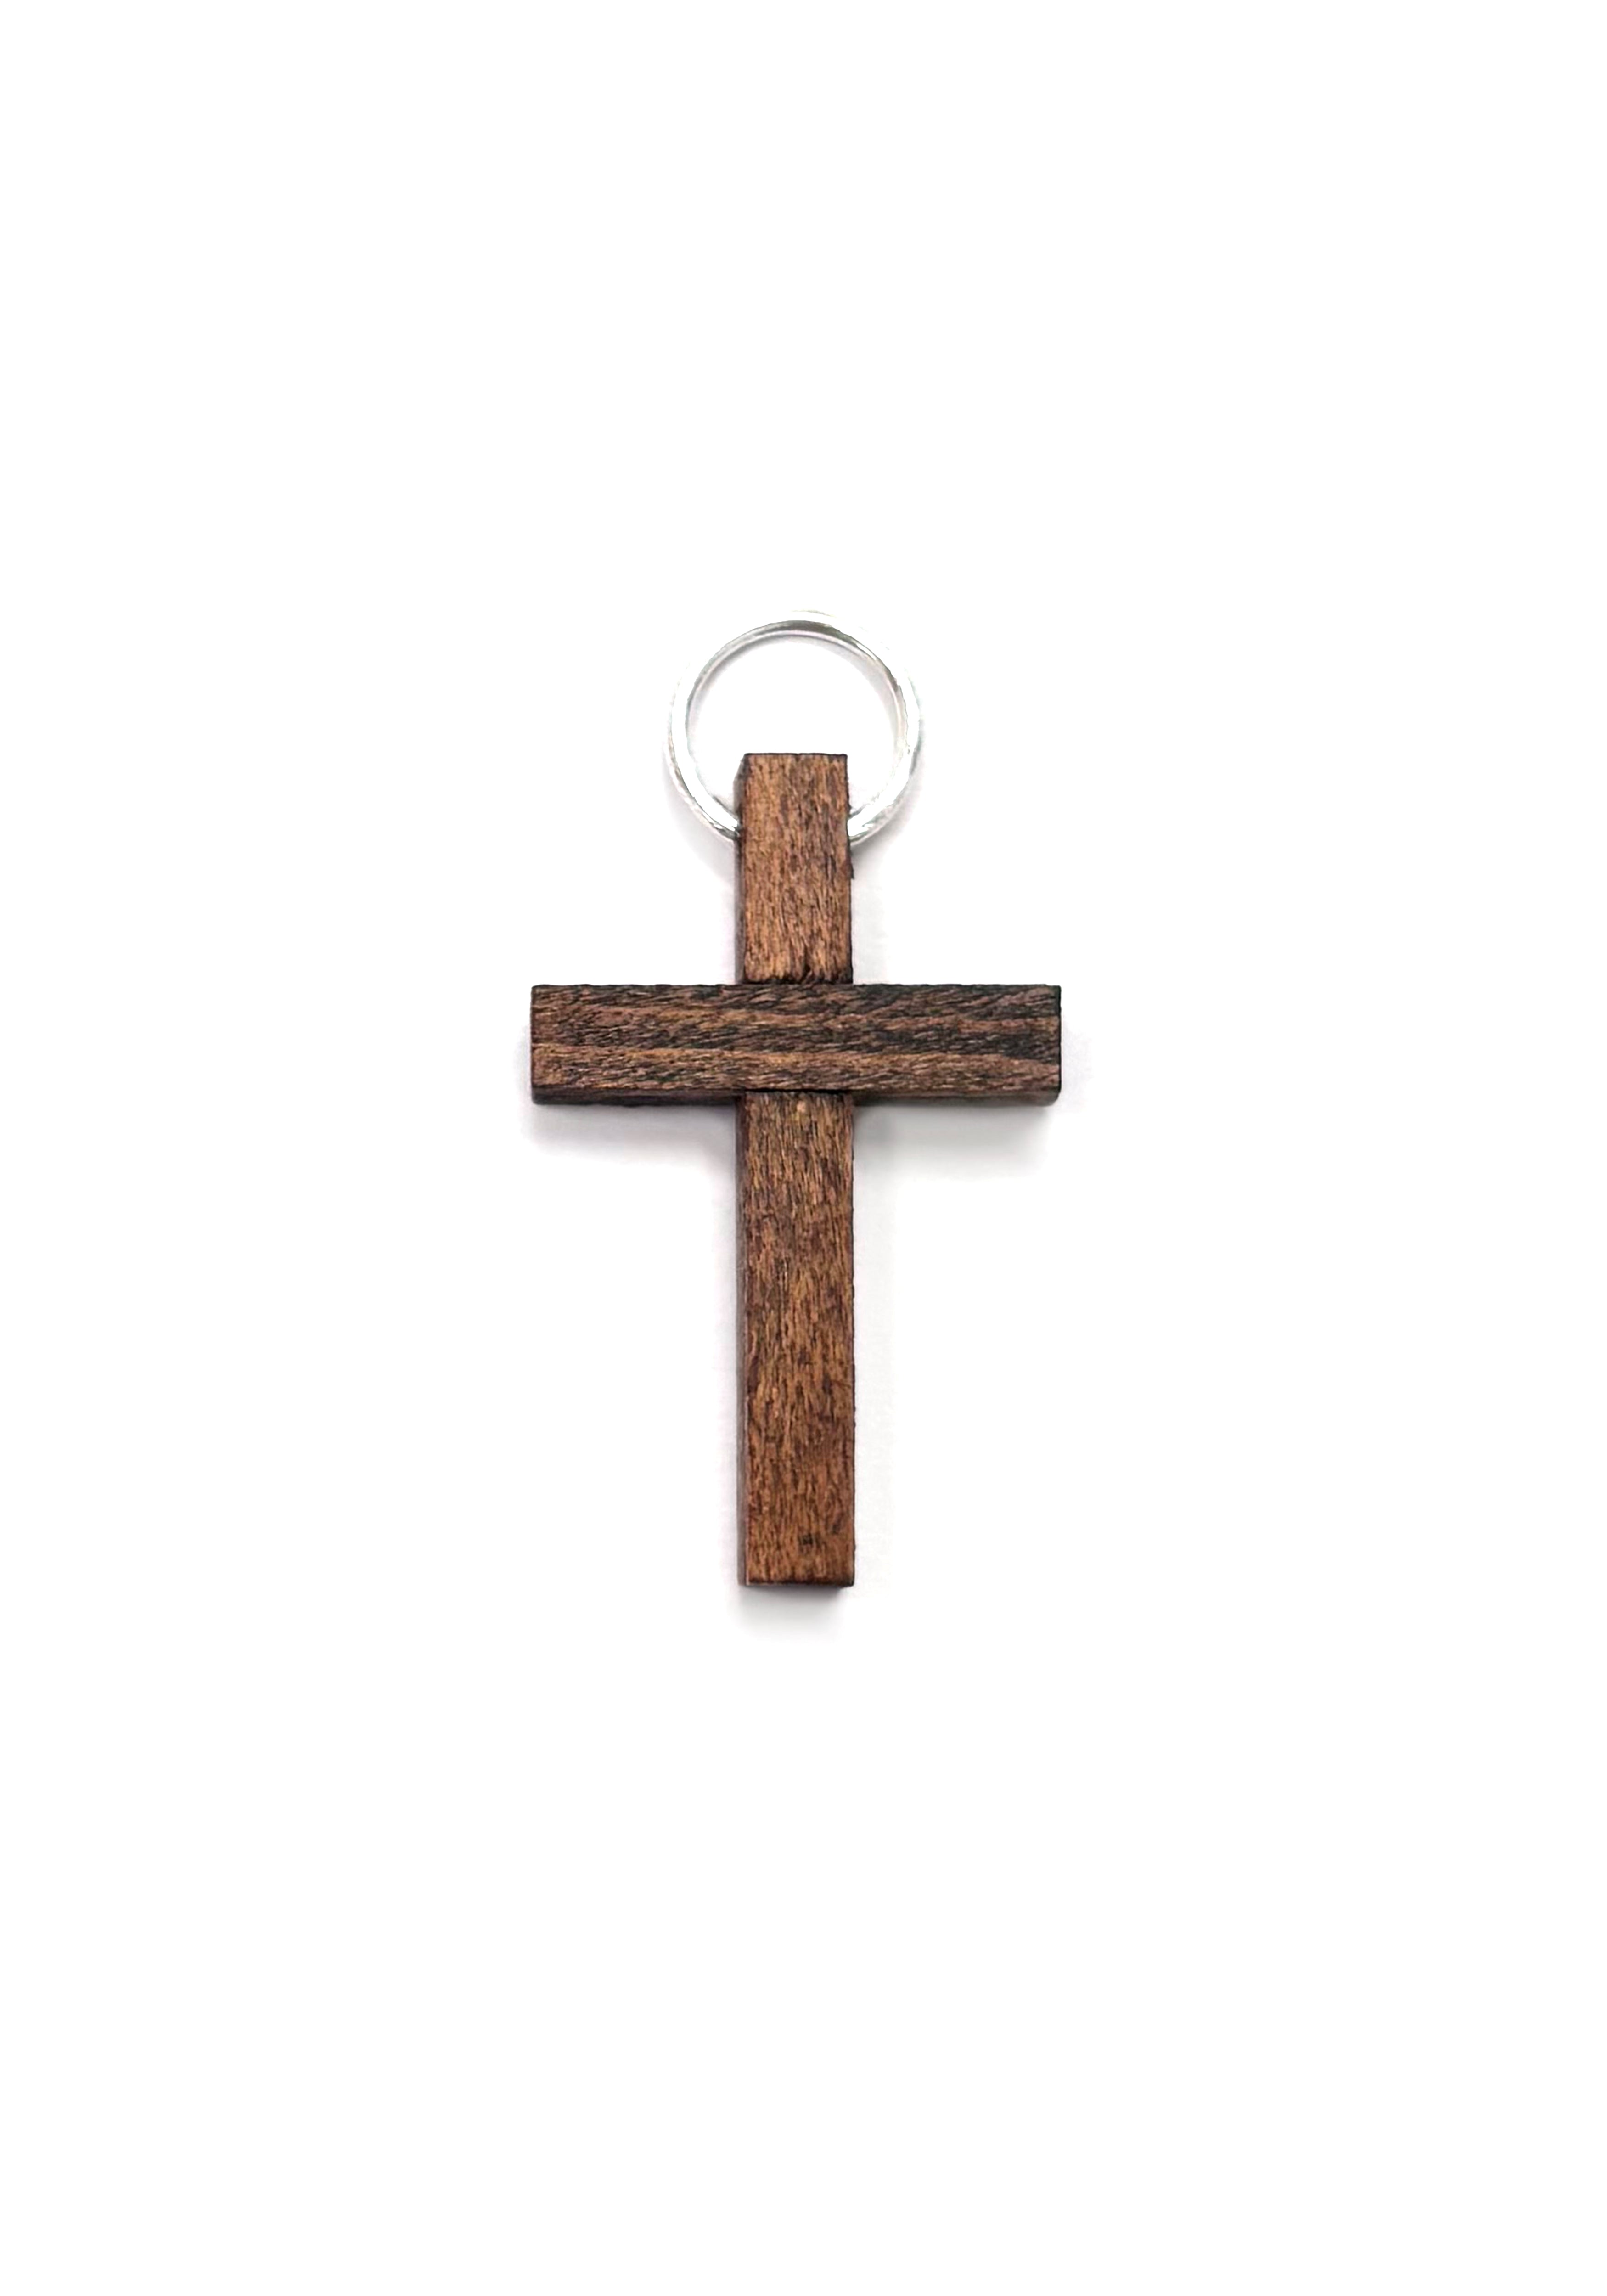 Small brown rustic wooden cross